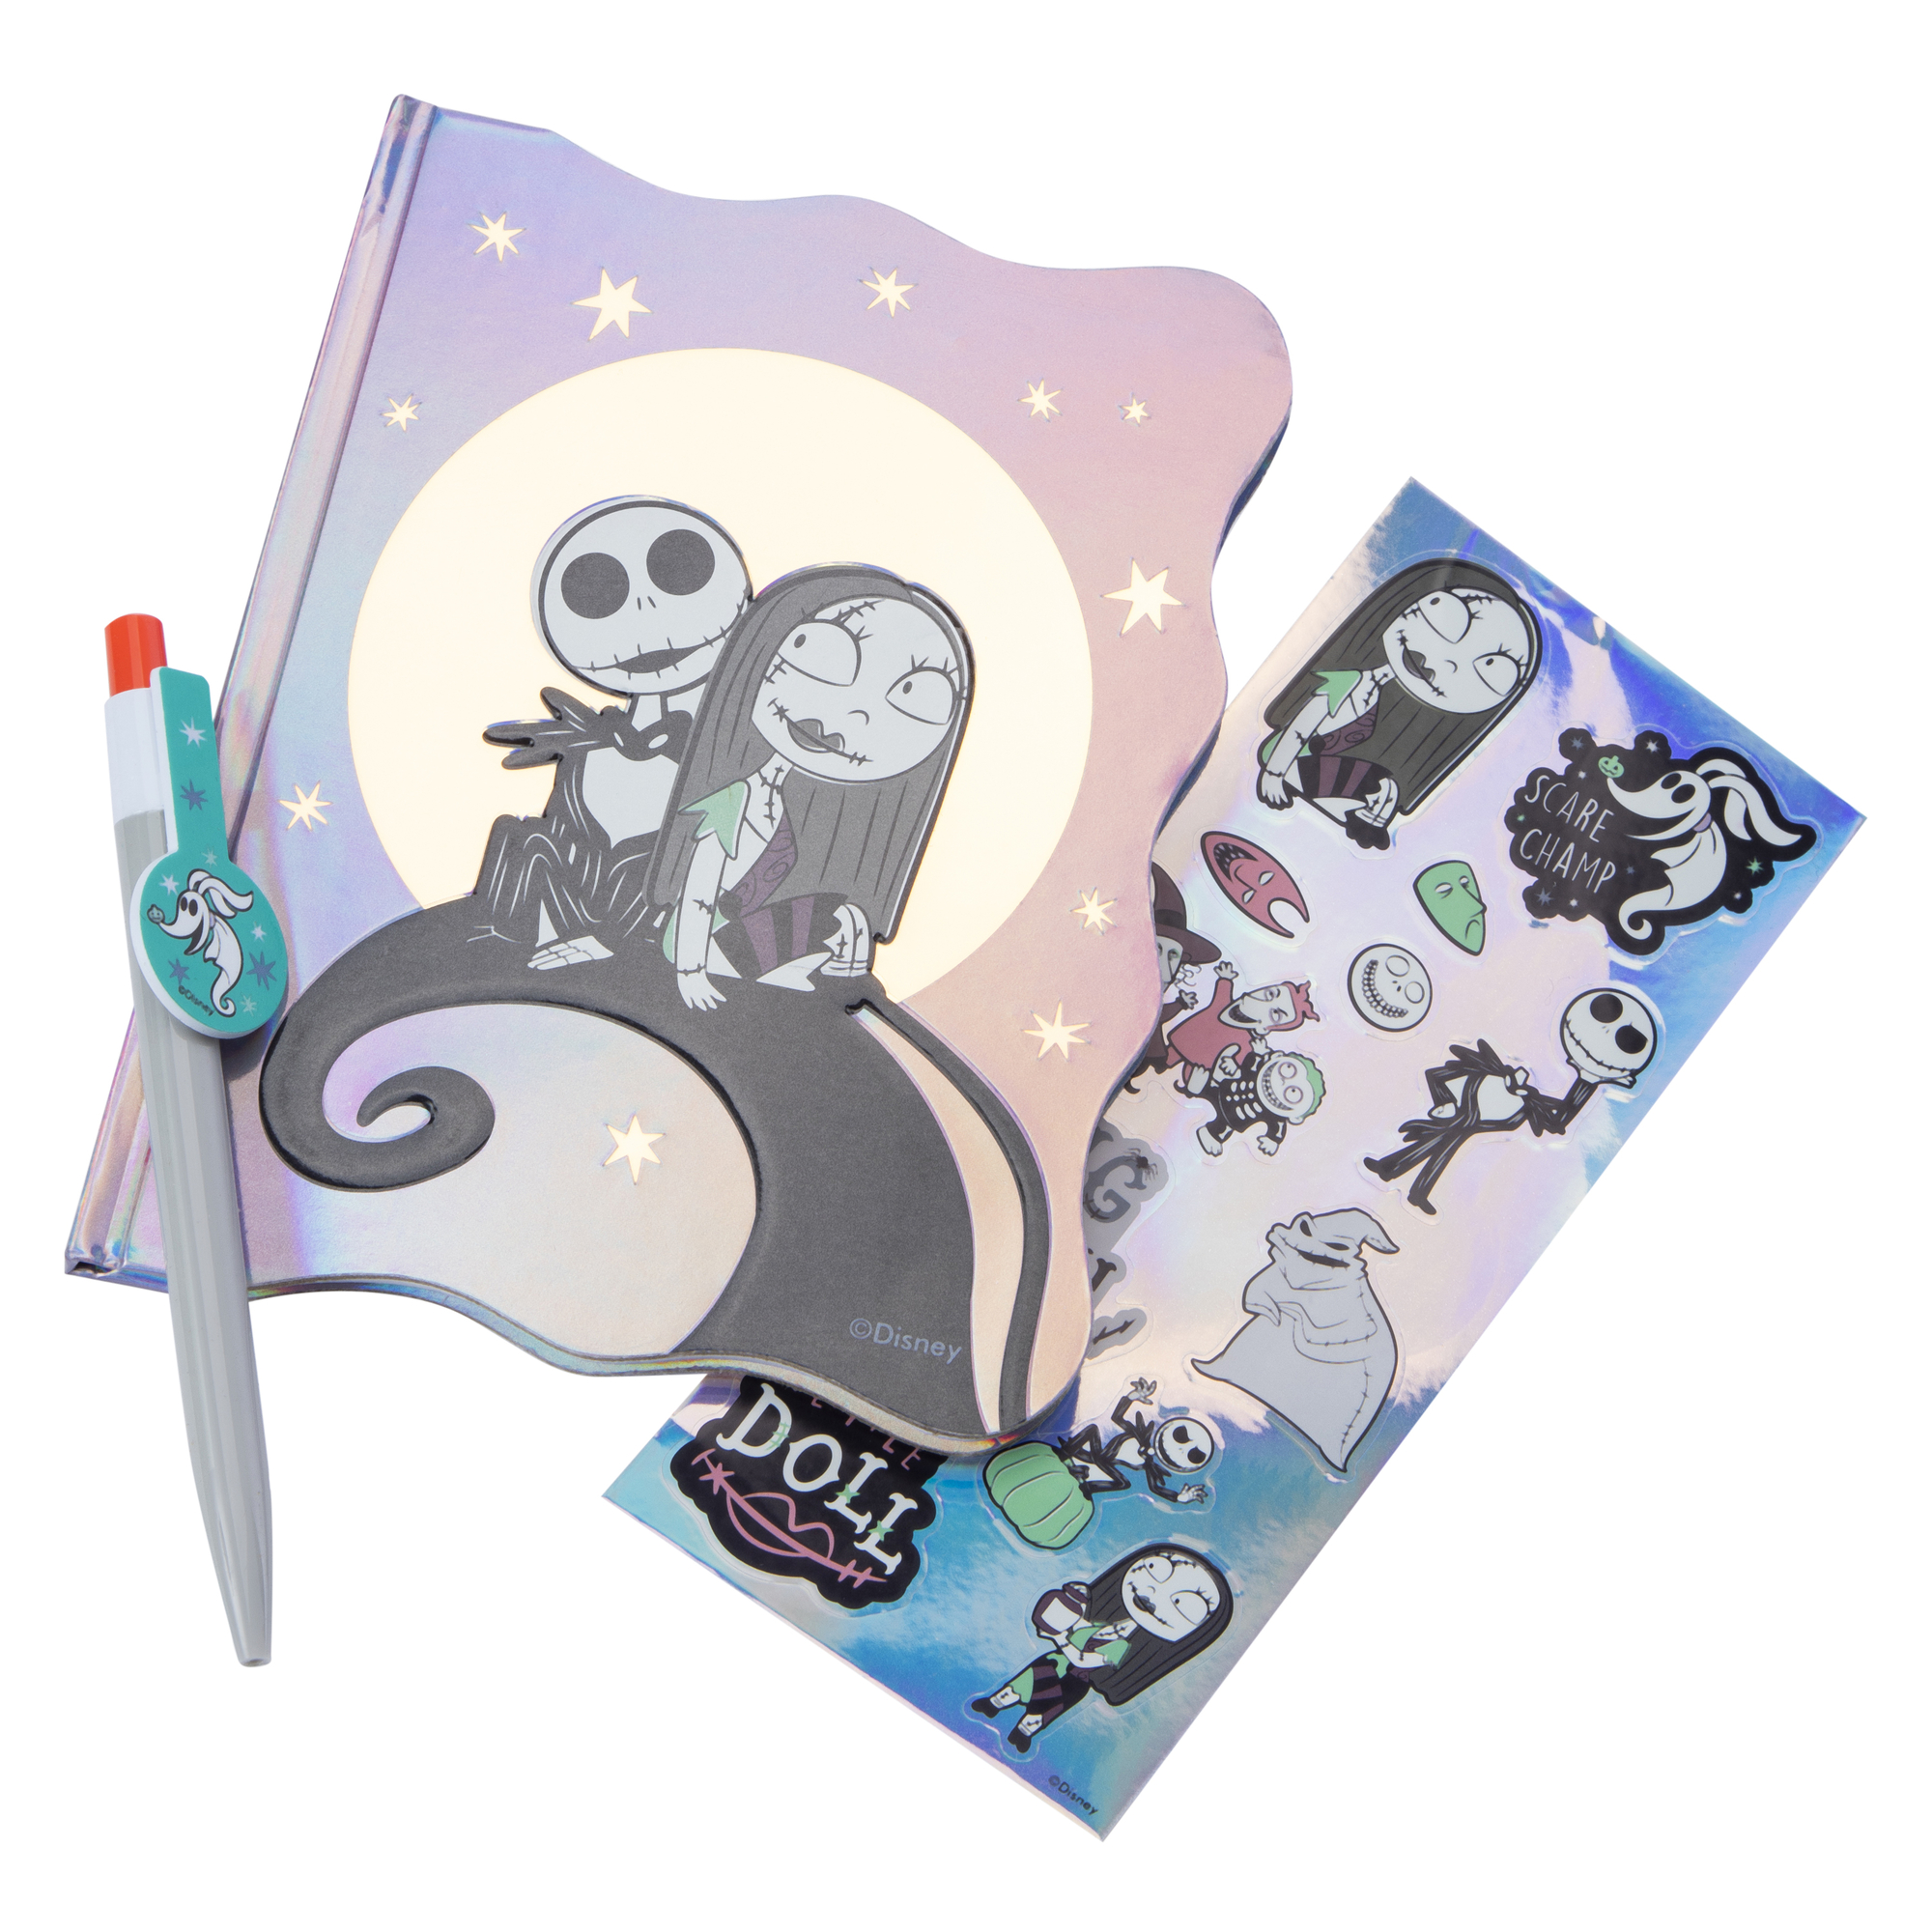 The Nightmare Before Christmas Journal Activity Set